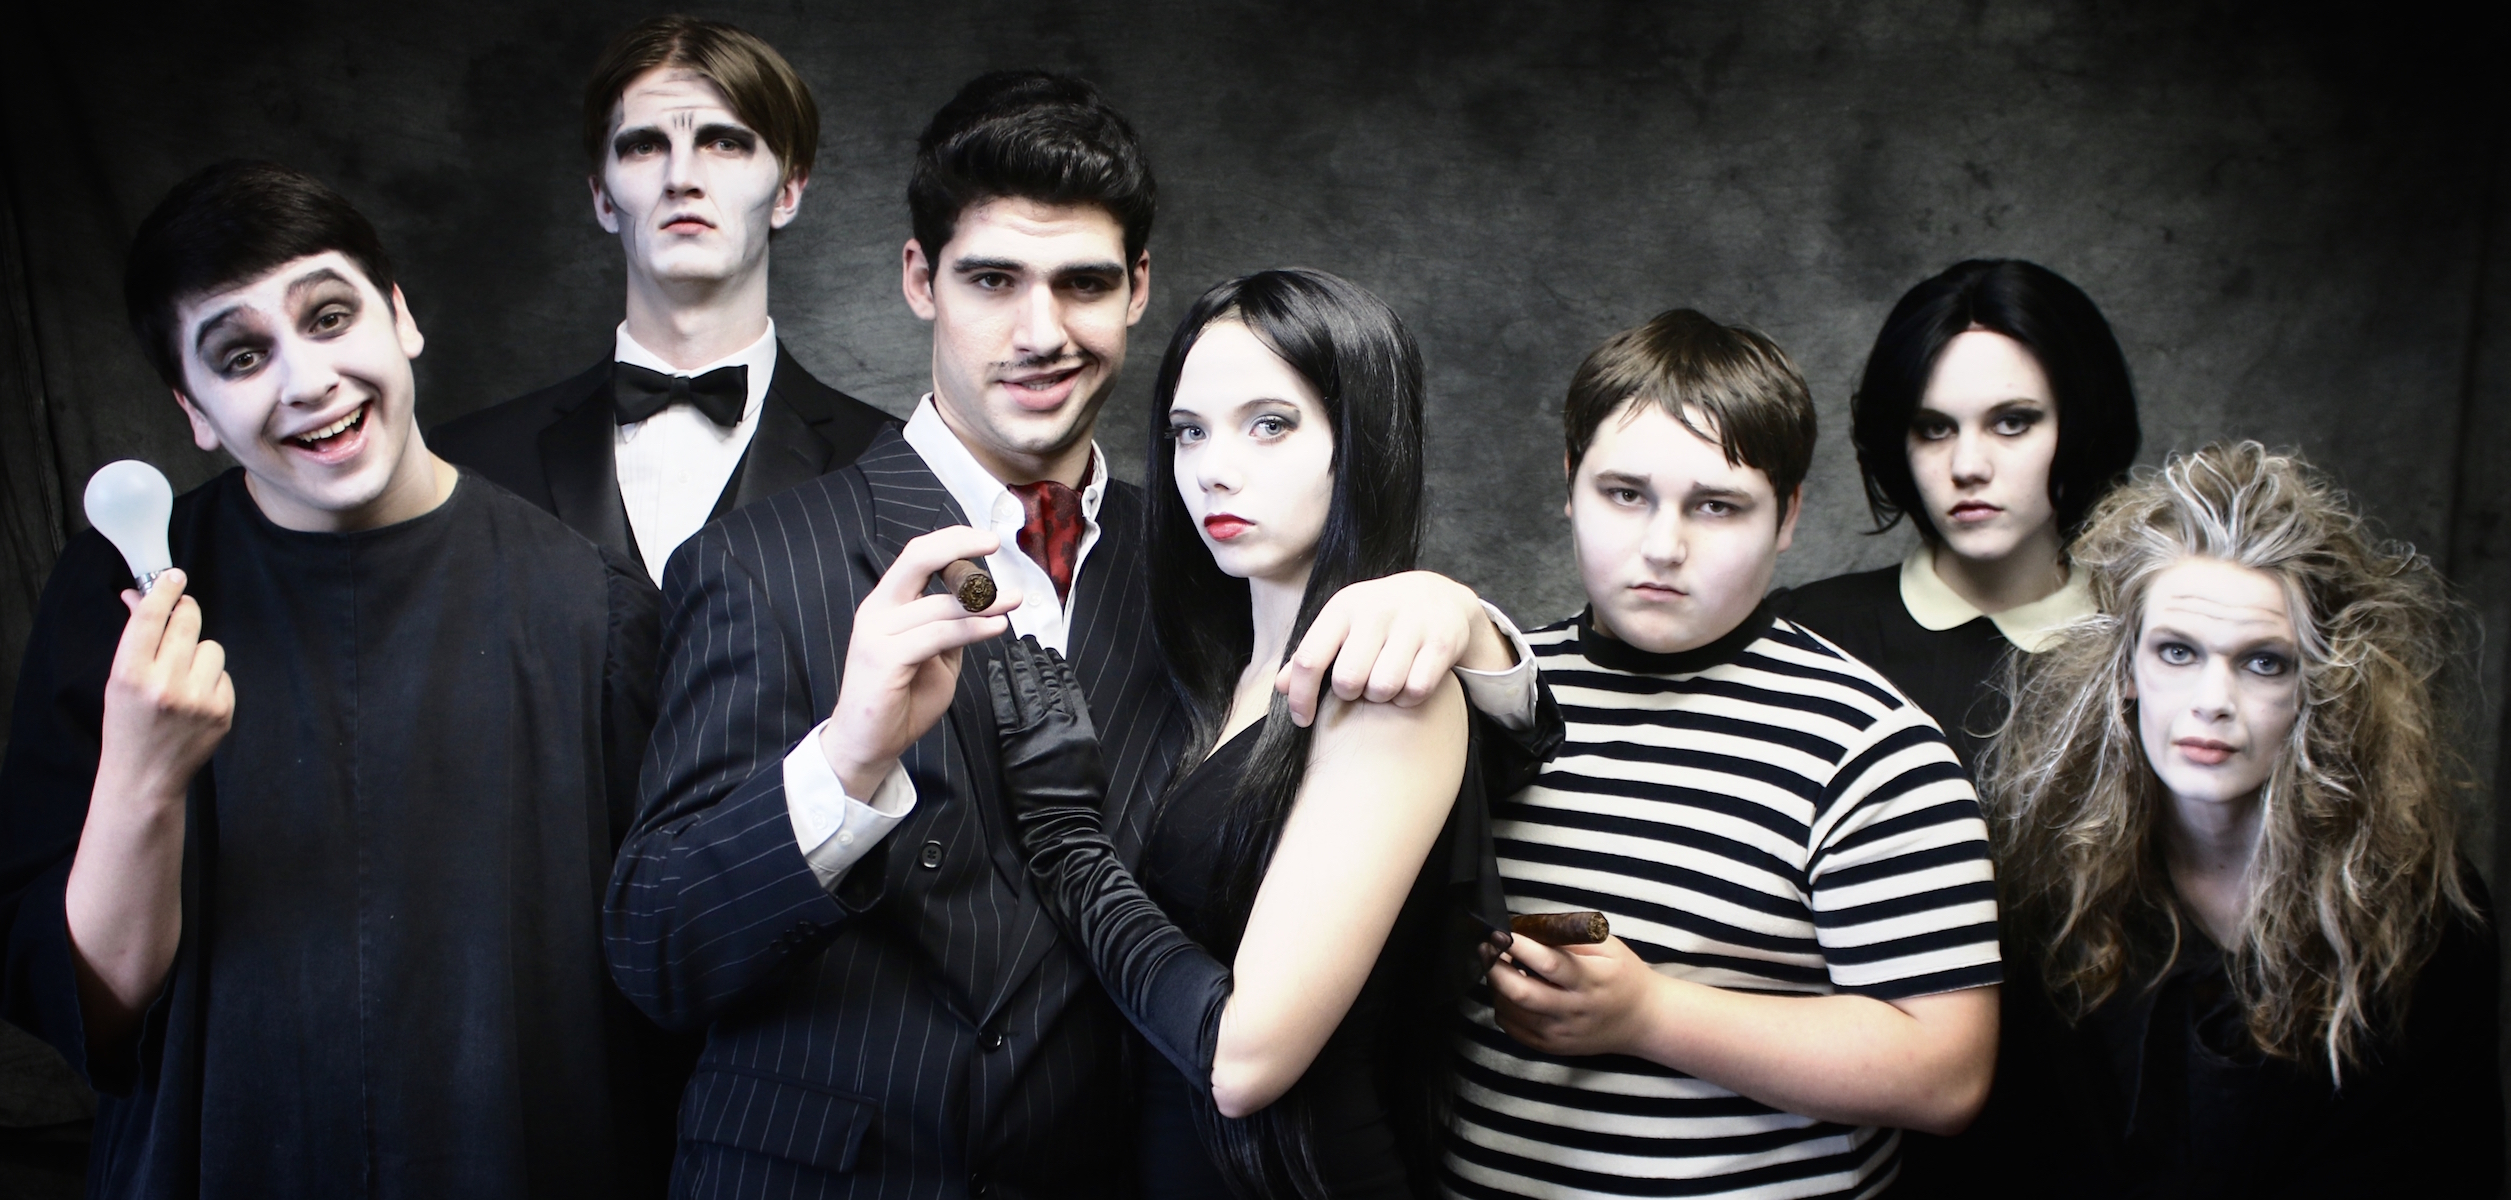 2511x1200 > The Addams Family Wallpapers